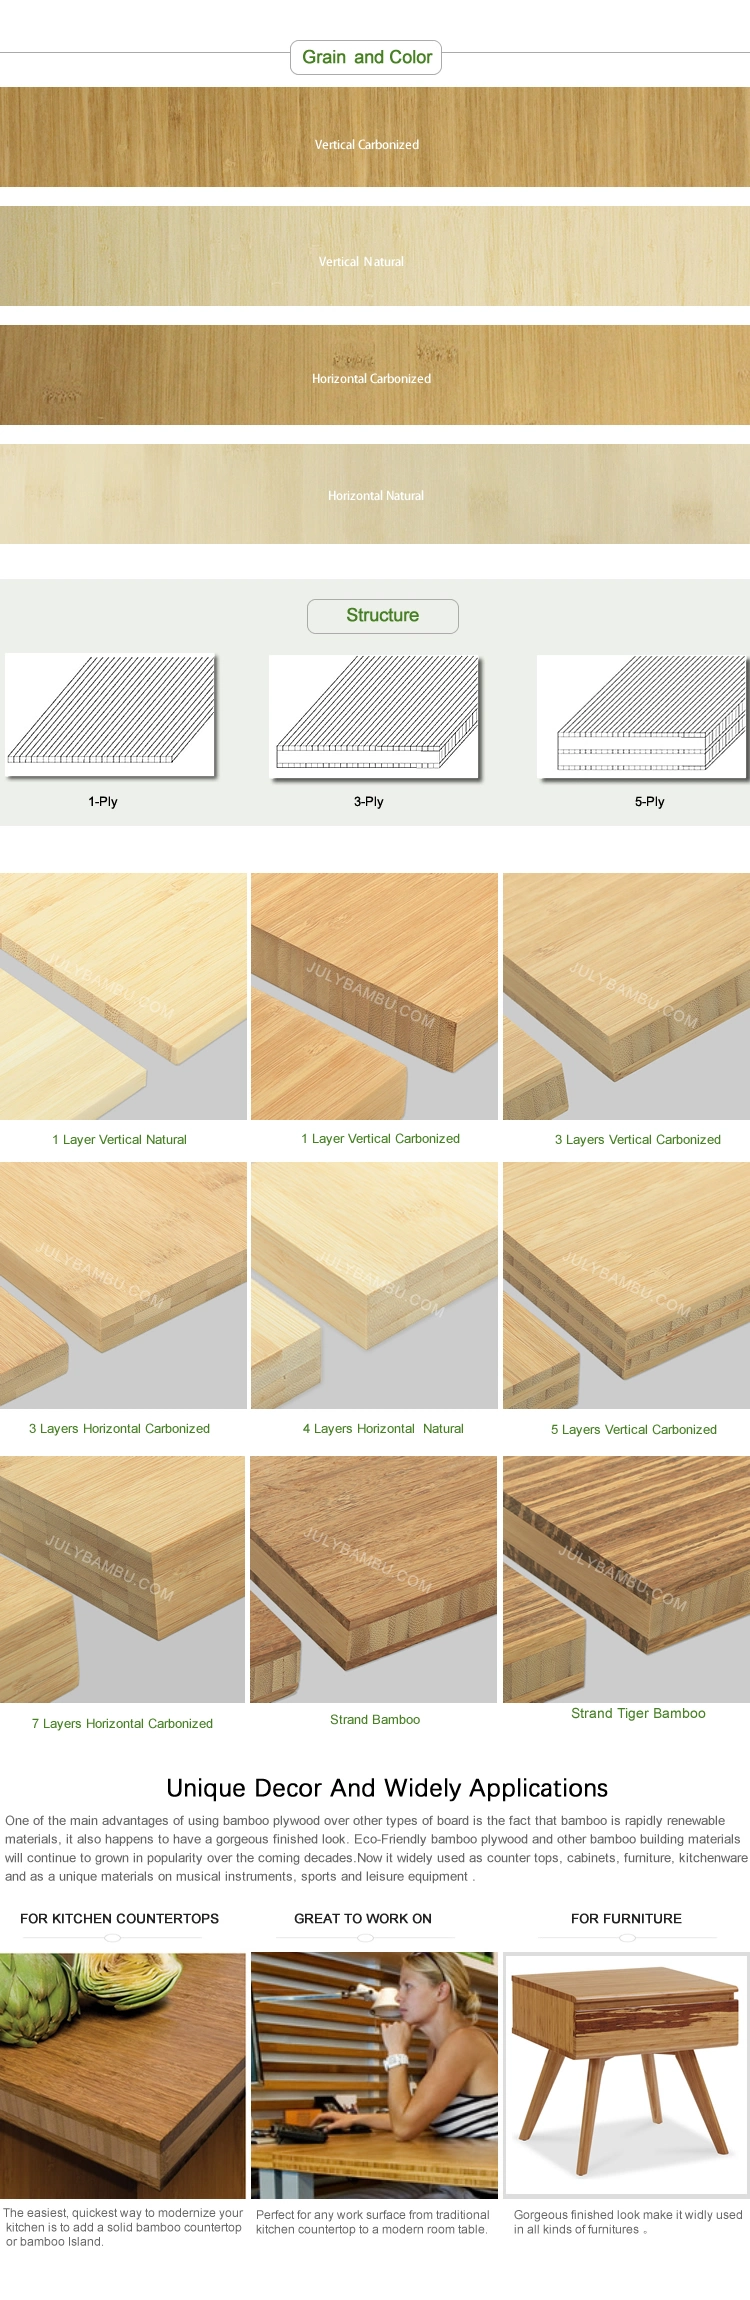 First Grade Laminated Bamboo Lumber / Bamboo Wood Use for Kitchen Worktop and Bamboo Table